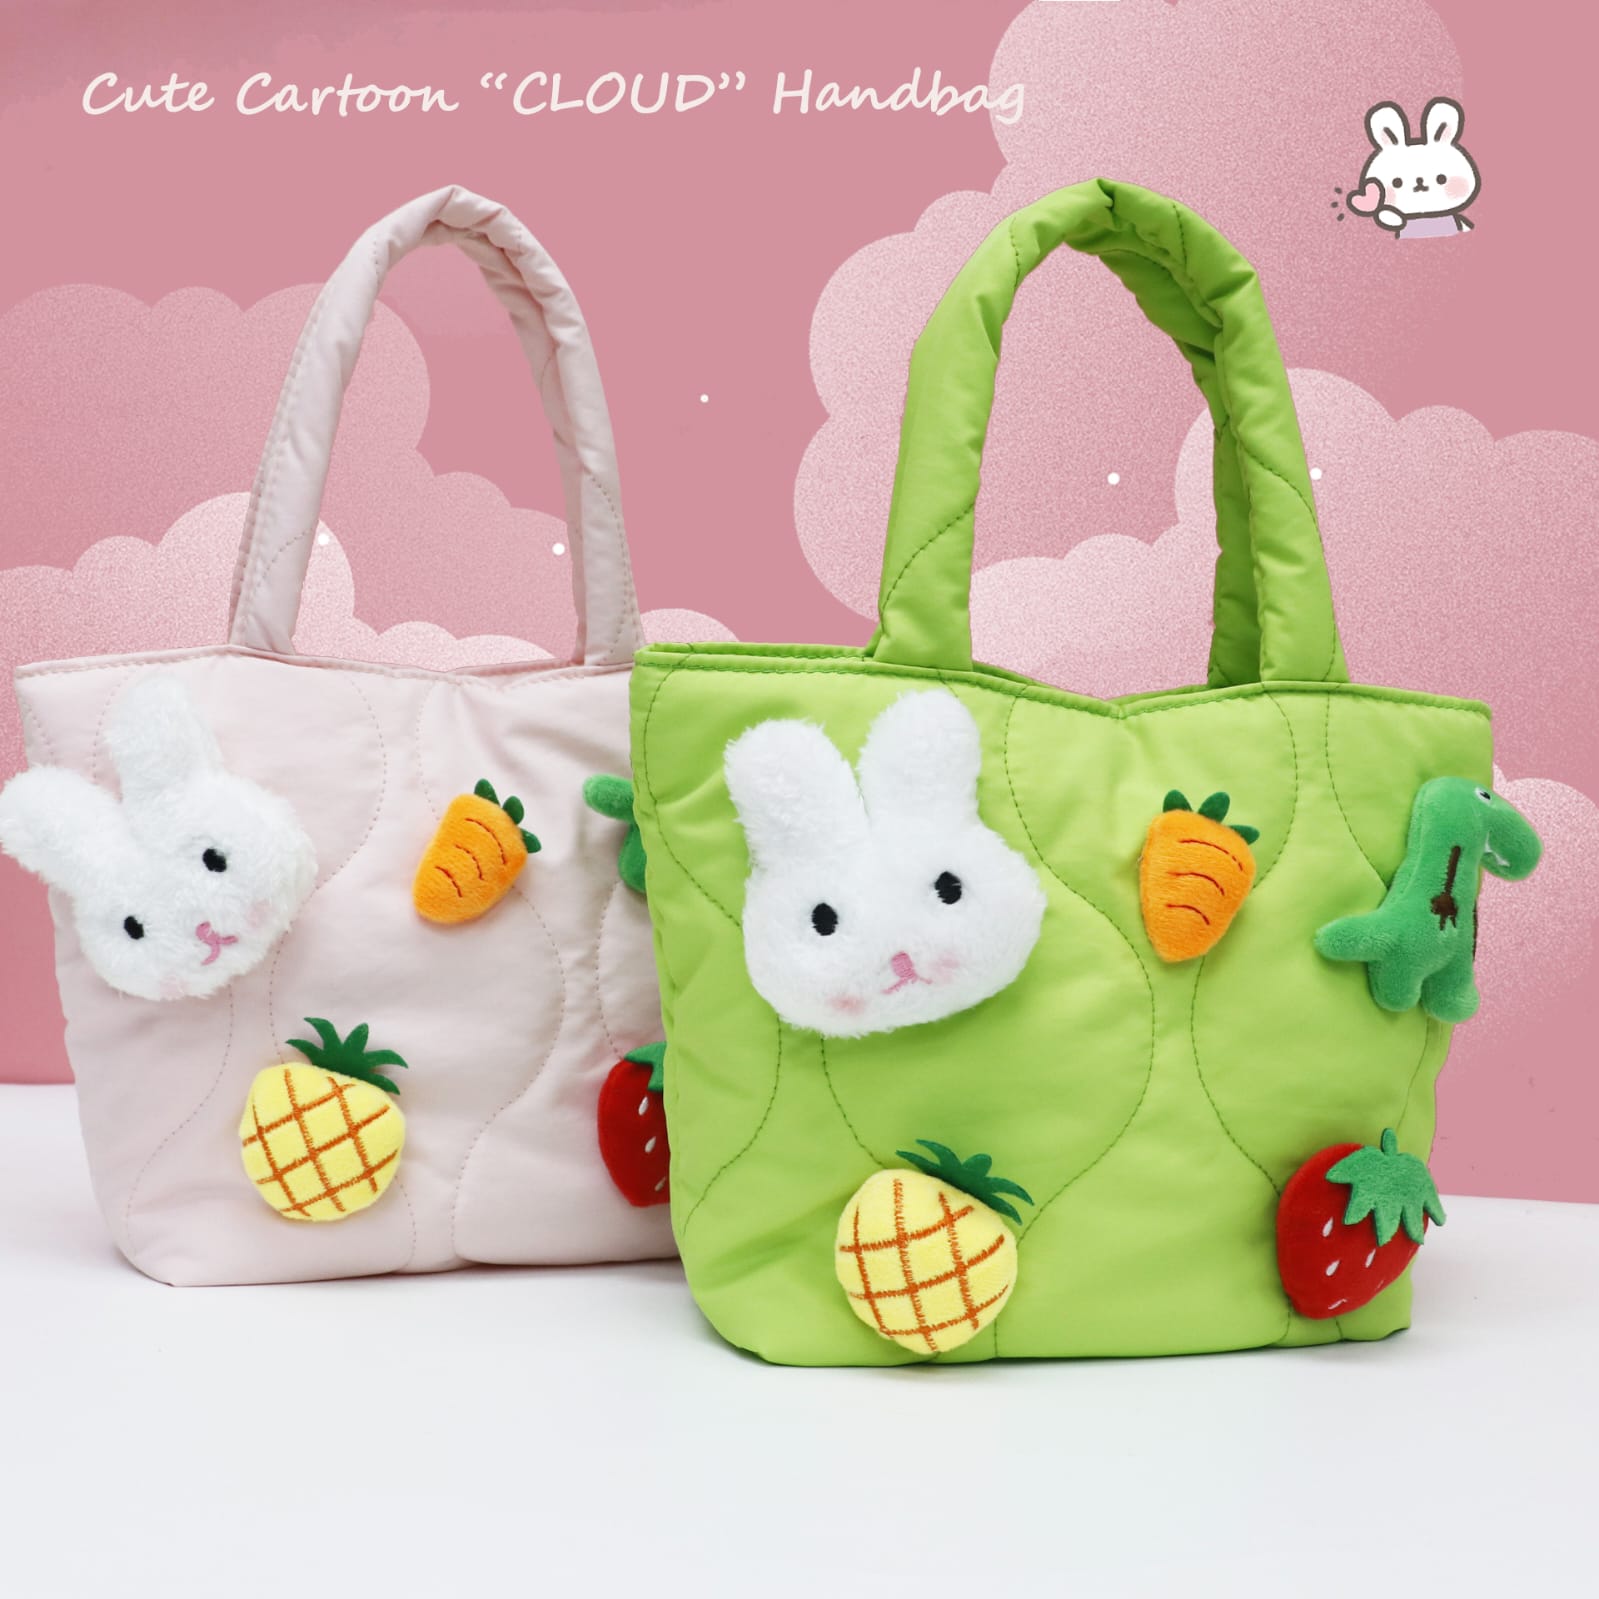 Cute Kawaii Handbags: Carry Your Cuteness Everywhere with Attached Soft Toys